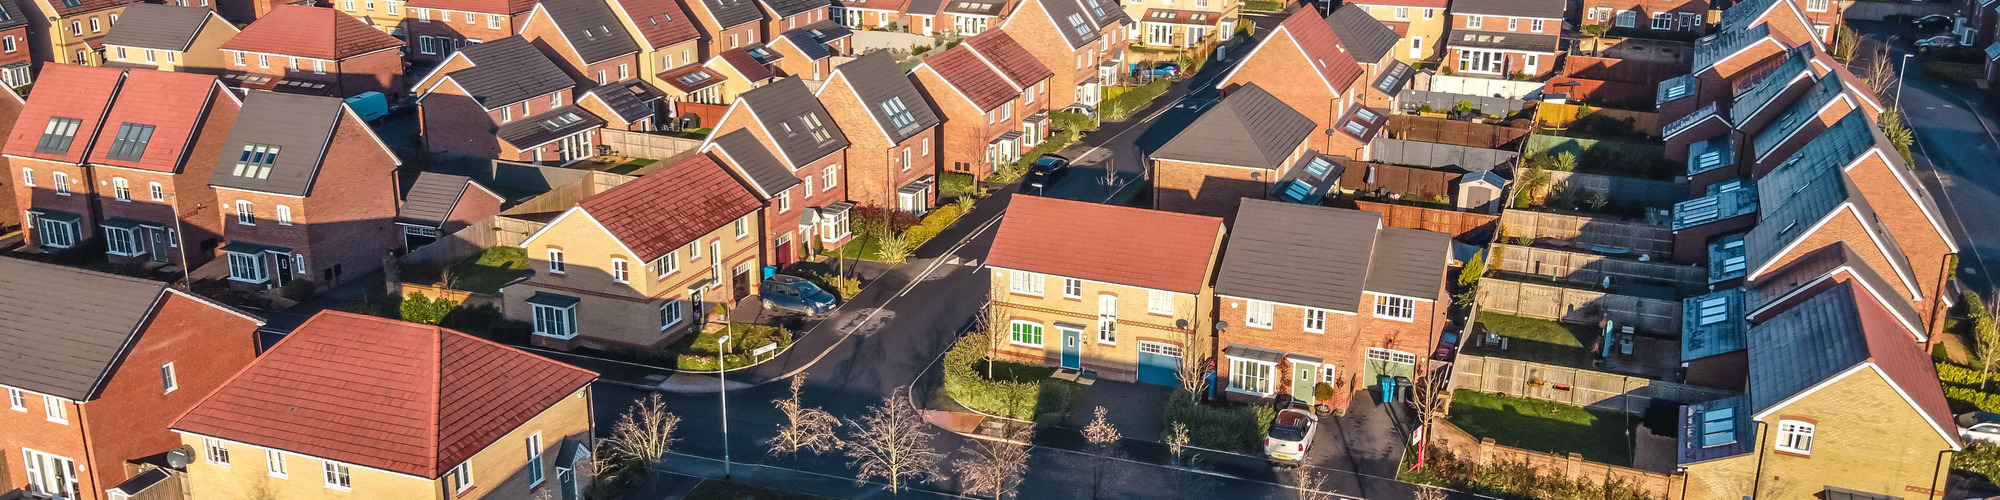 How to Avoid Land Registry Requisitions - The Latest News for Conveyancers